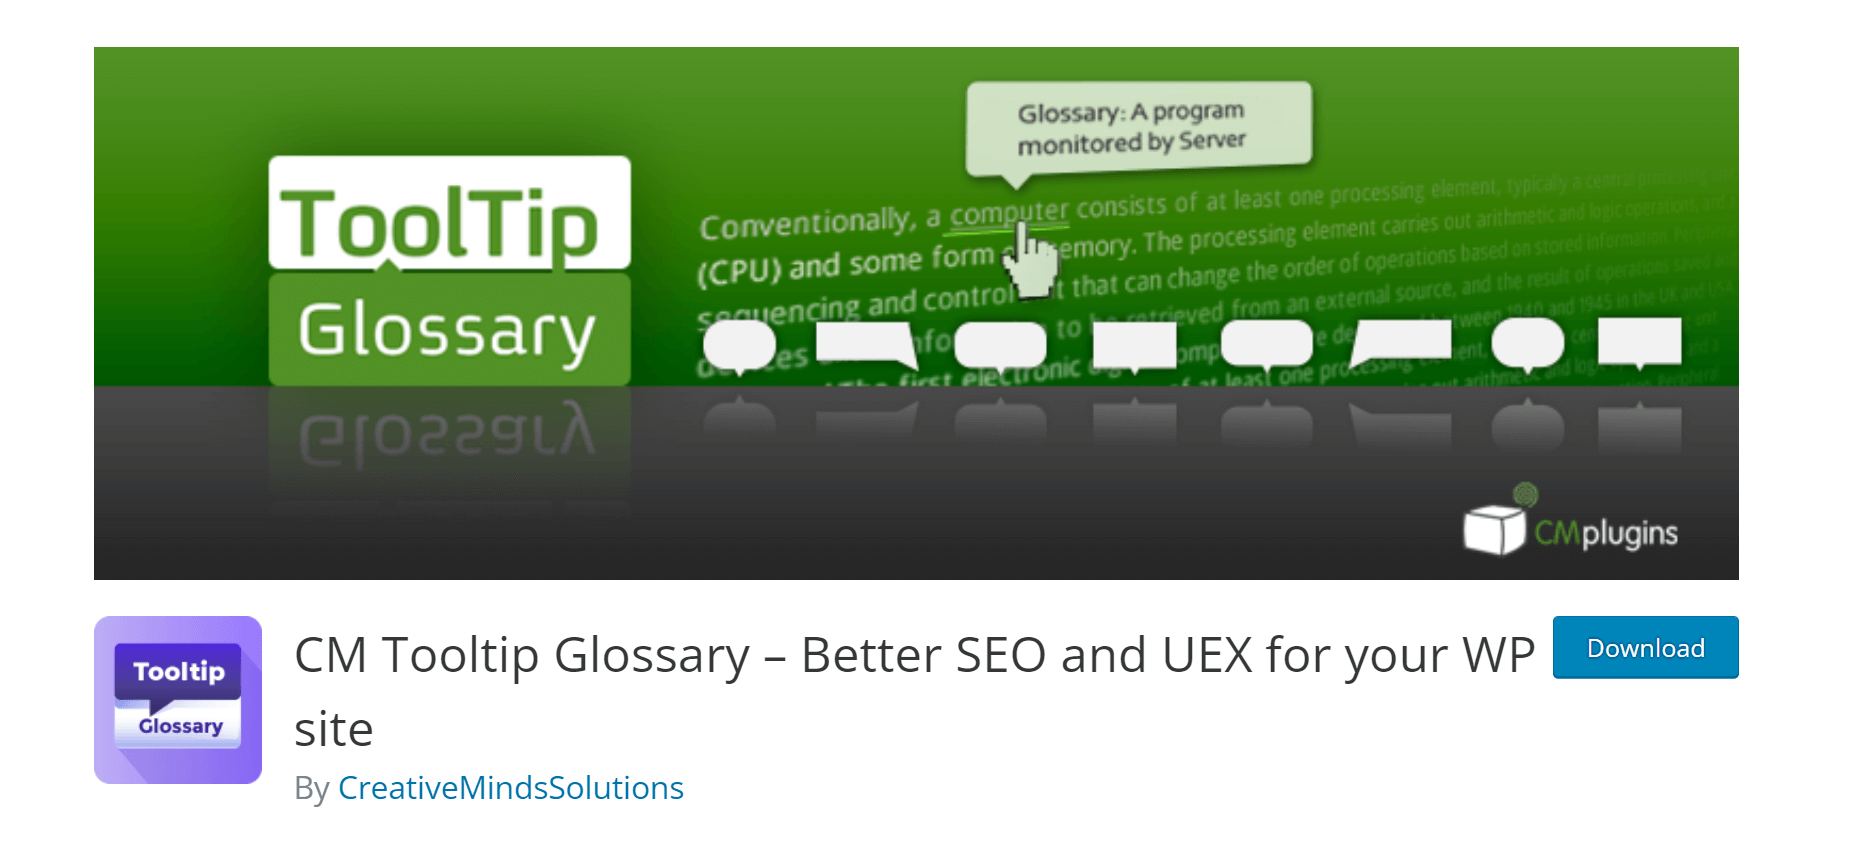 CM Tooltip Glossary wordpress plugin for content